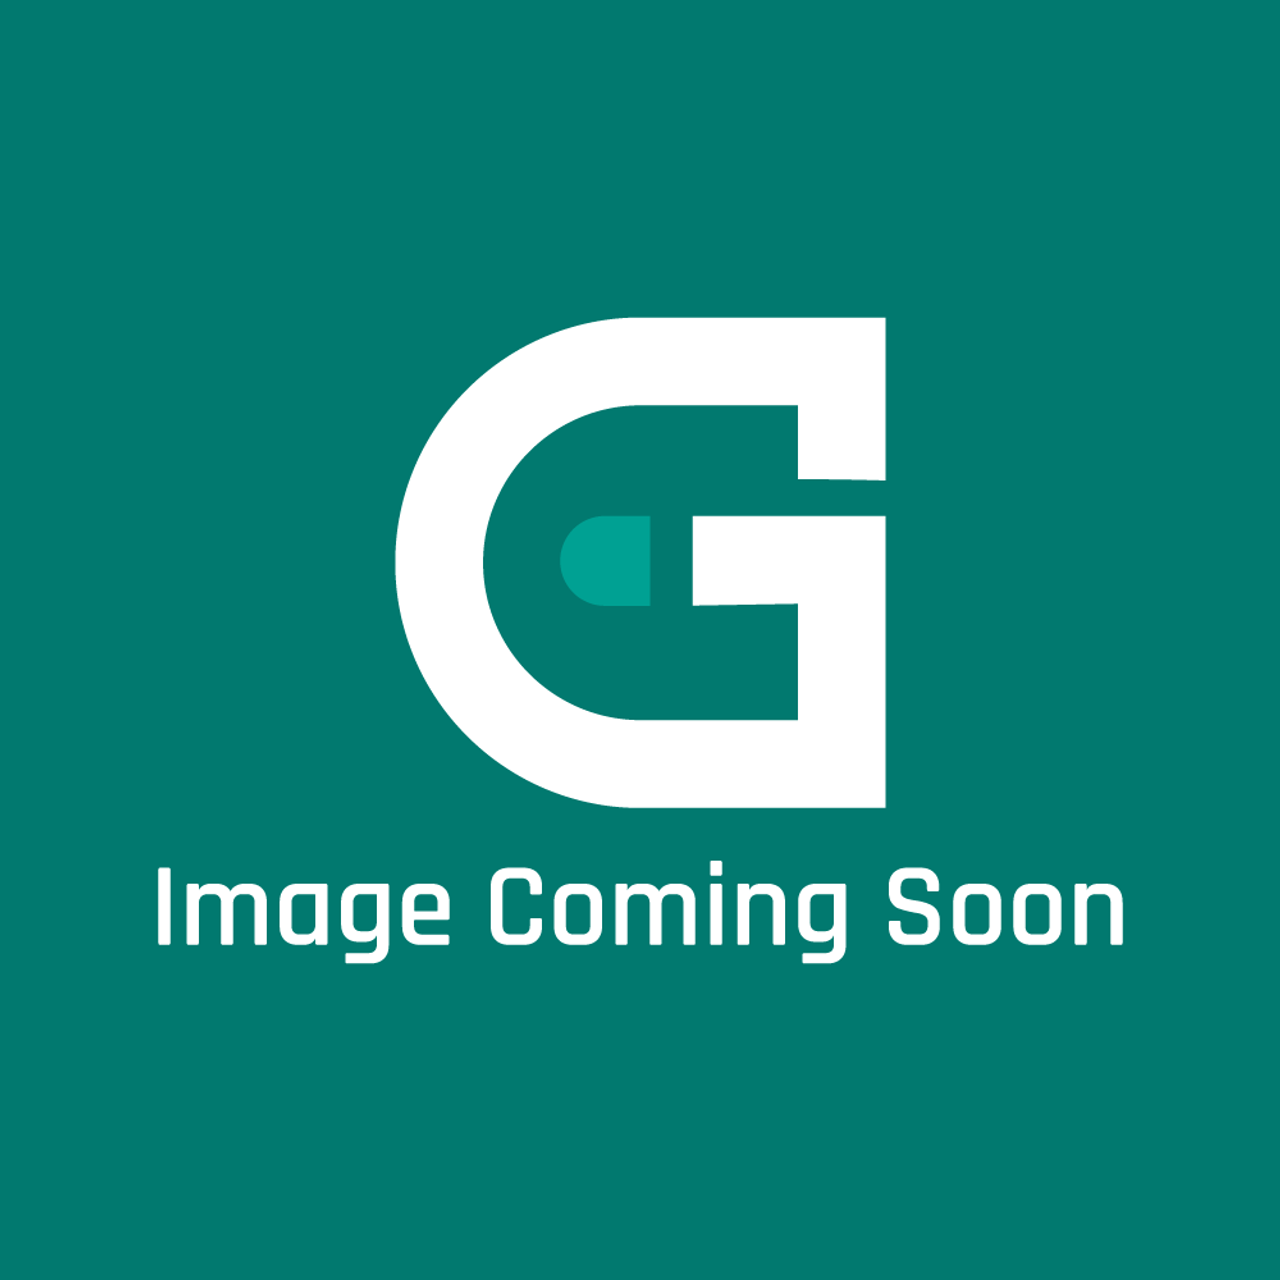 AGA Marvel 033610-0733 - Lh Outer Door Panel - Brk - Image Coming Soon!